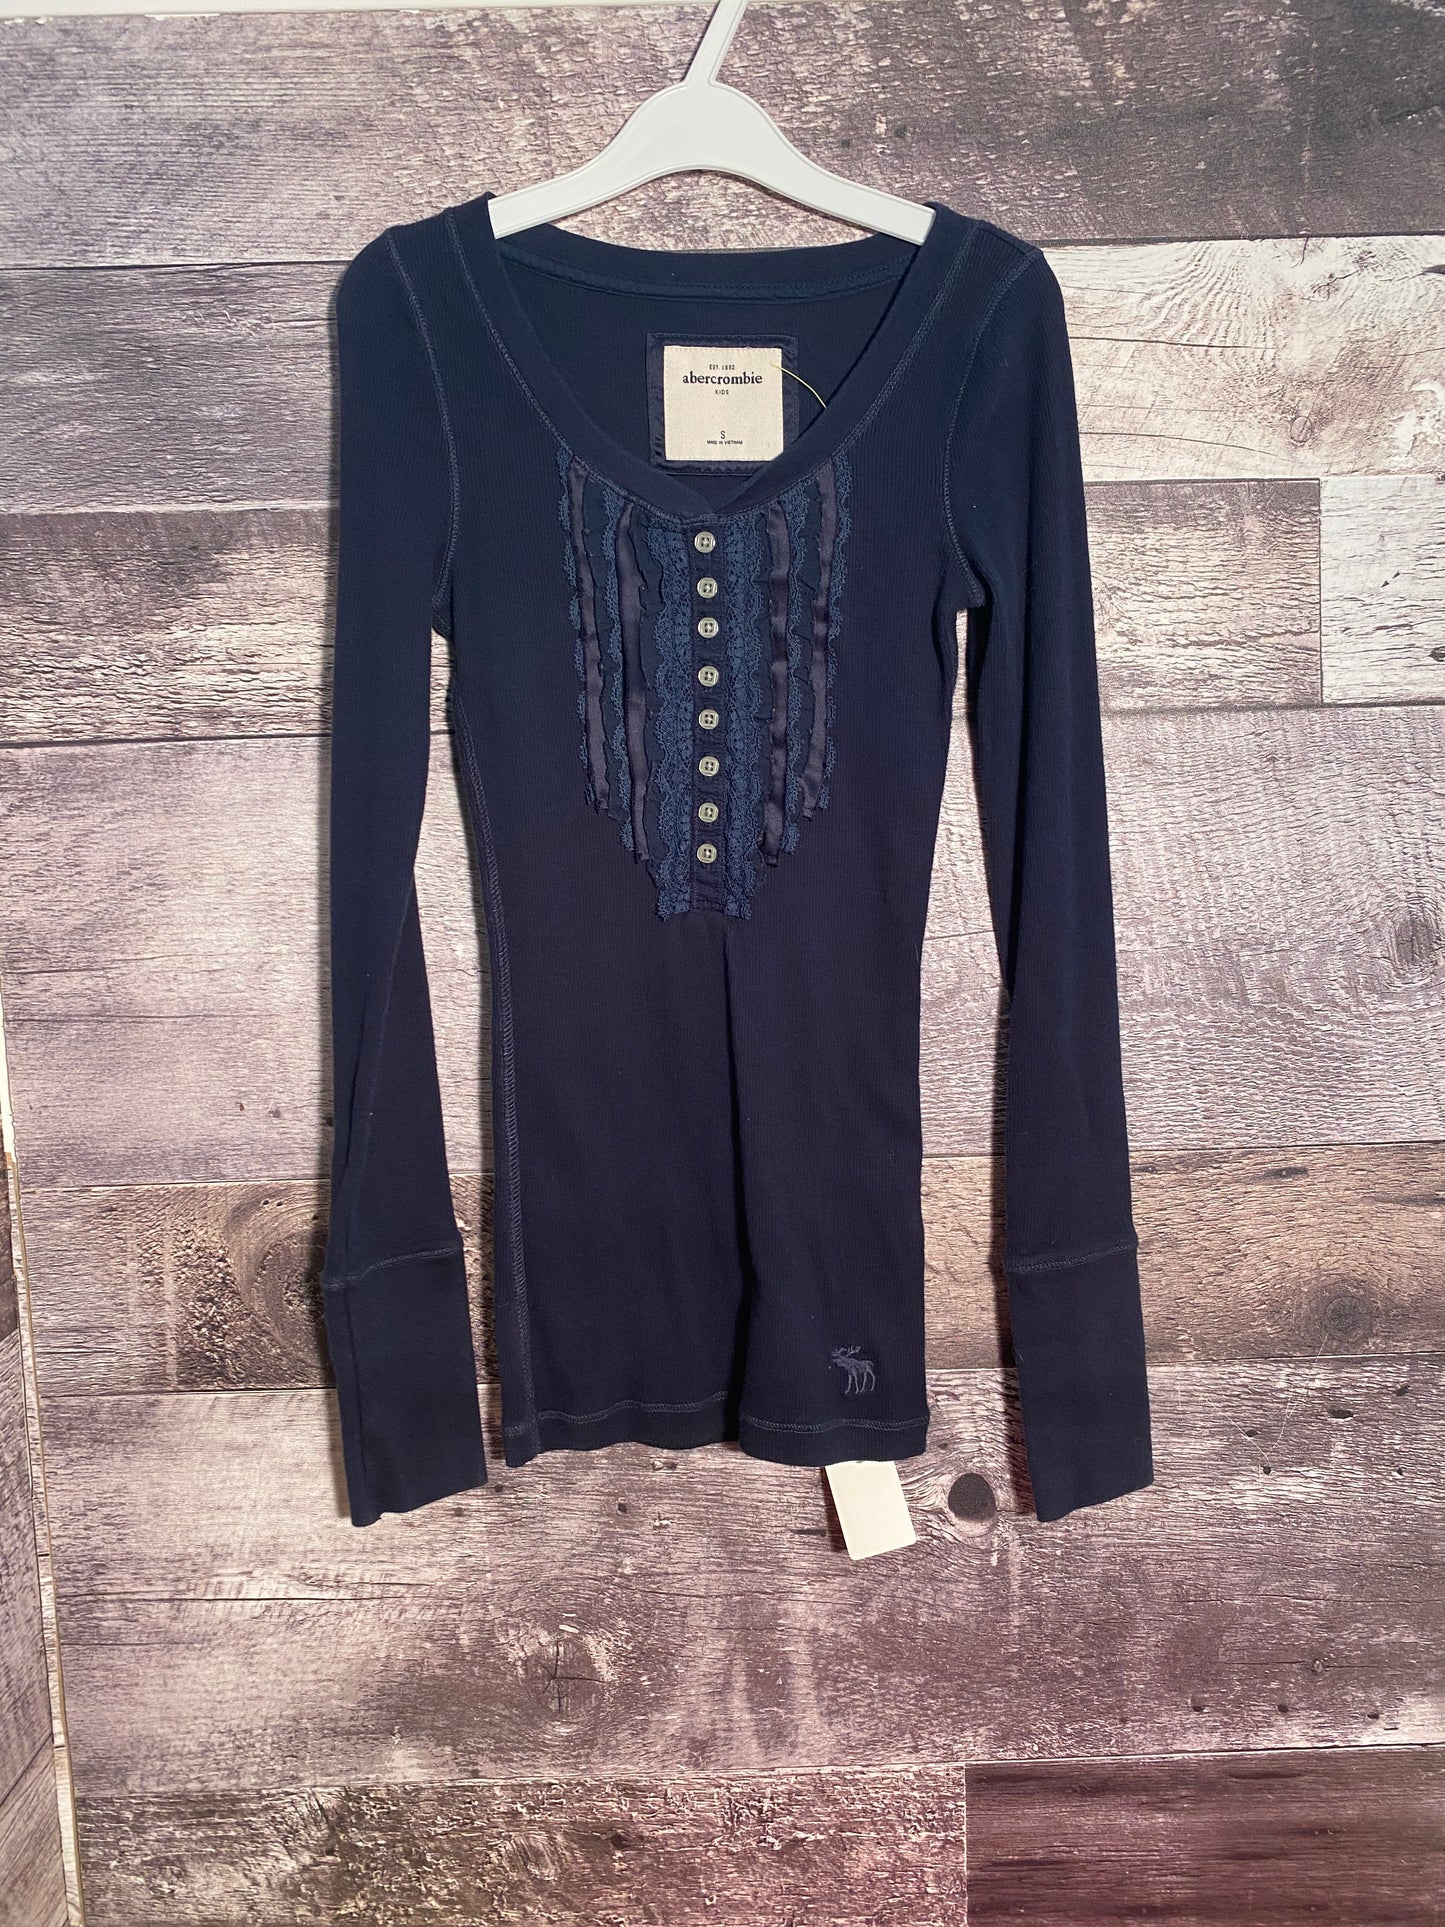 girls navy blue abercrombie top size small